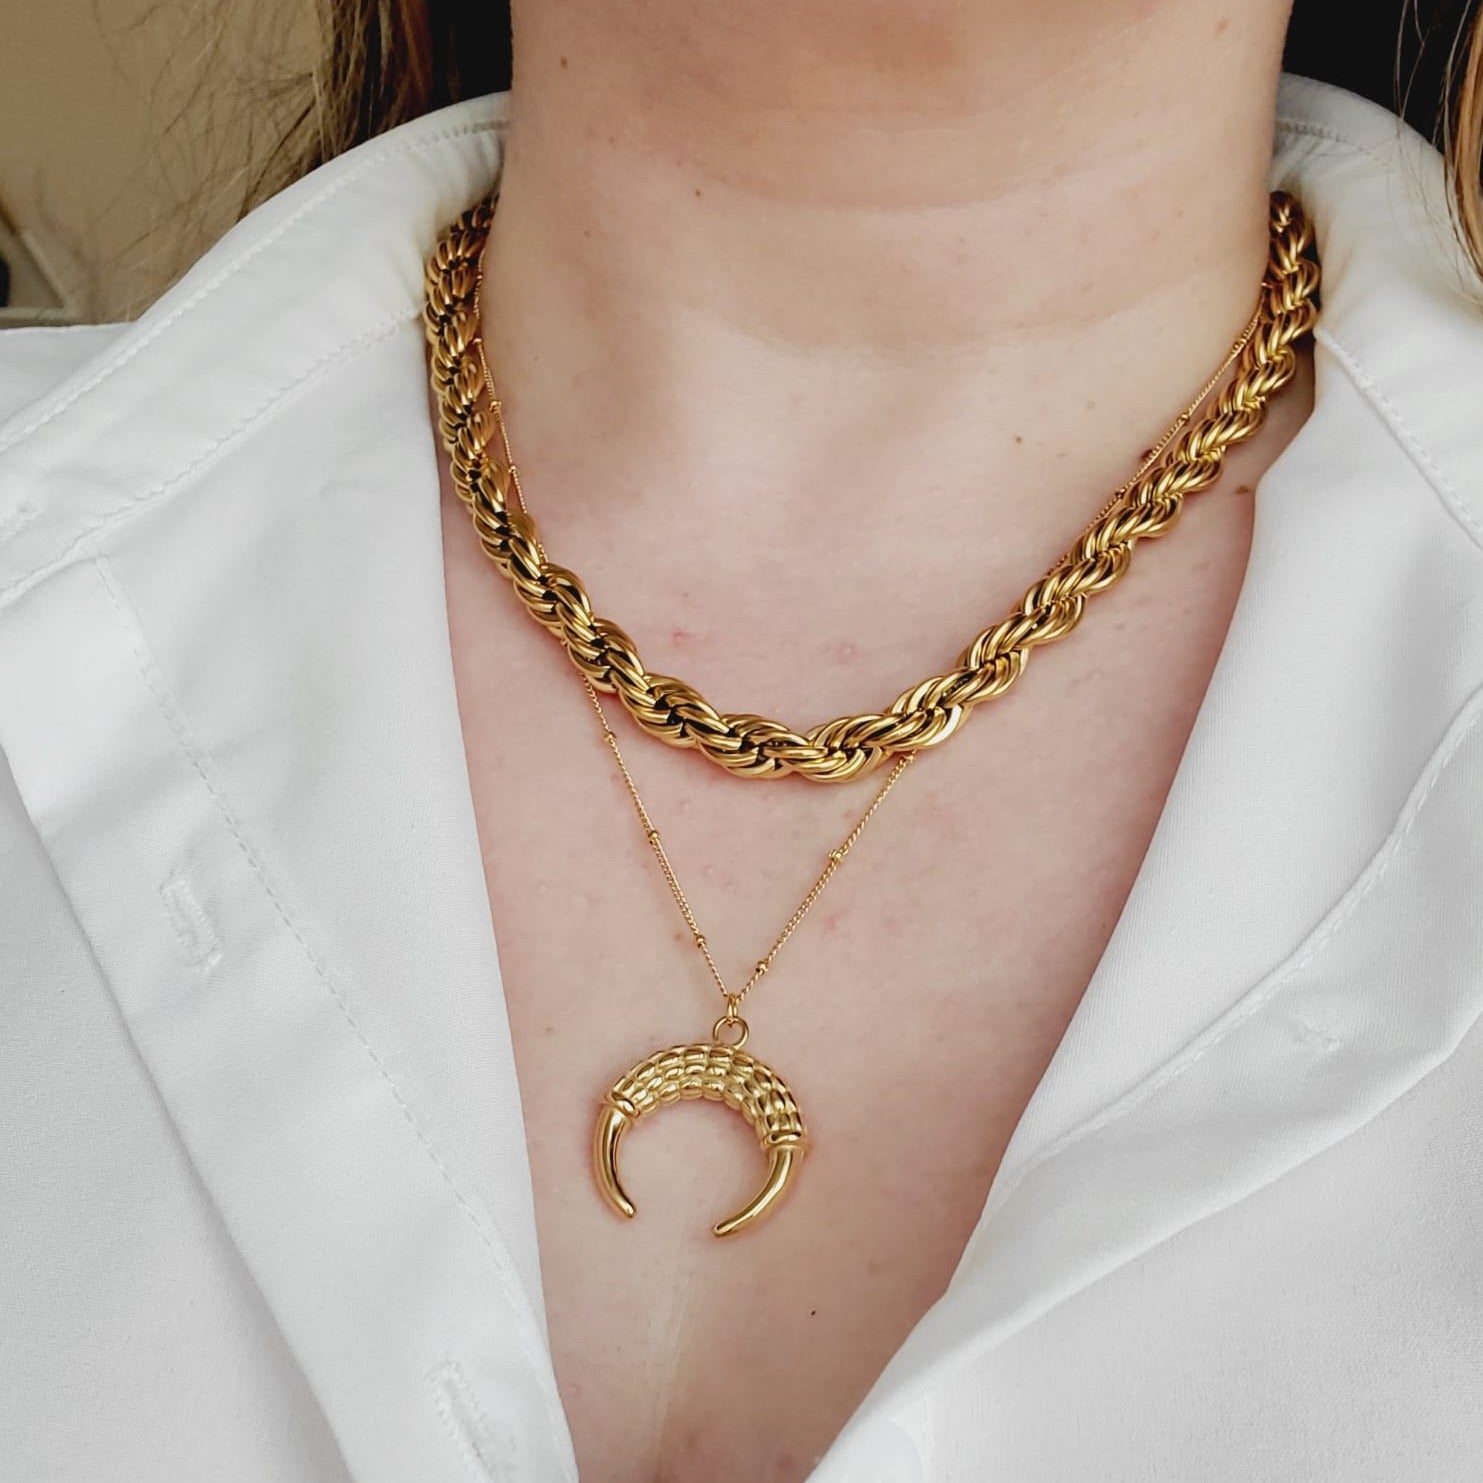 Minimalist chain, Gold filled Chain, Flat Gold Necklace, Snake Chain, Water resistant jewelry, water resistant Necklace, Water resistant bracelet, vintage jewelry, vintage jewelry, vintage necklace, 14k gold necklace, 14k gold jewelry, 14k gold necklace, fine jewelry, fine necklace, fine bracelet, snake gold necklace, bold necklace, bold jewelry, handmade jewelry, fine jewelry brand, hello luxy, joyeria fina, gold plated chain, 18k gold plated chain, horn necklace, textured horn necklace